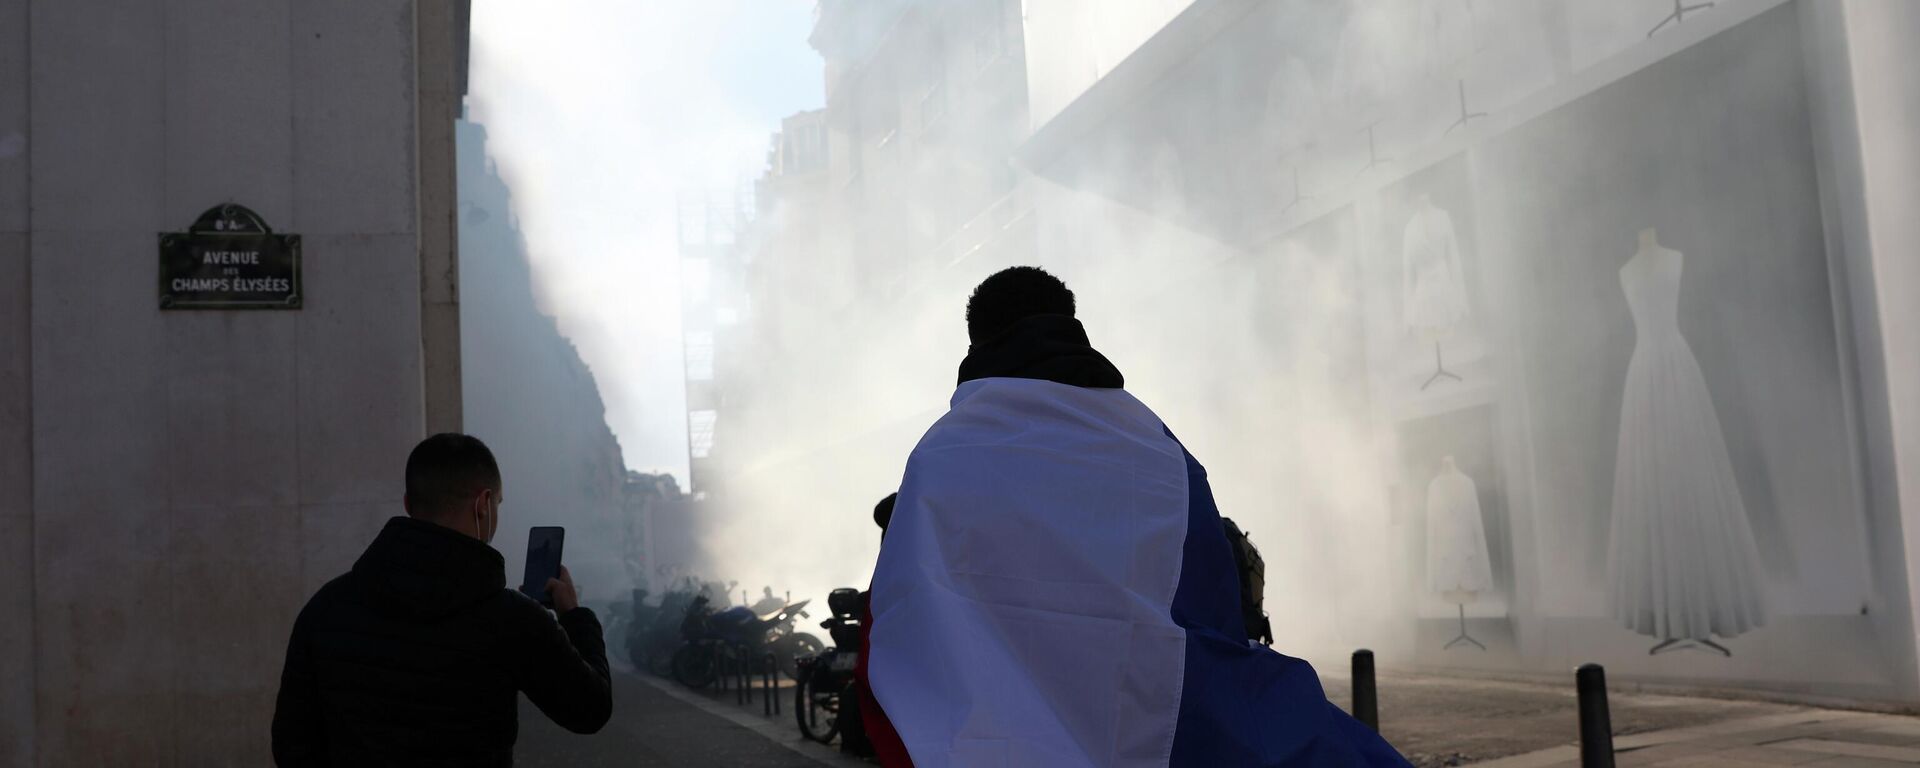 A protester leaves the Champs-Elysees avenue though tear gas during a protest, Saturday, Feb.12, 2022 in Paris. - Sputnik International, 1920, 24.04.2022